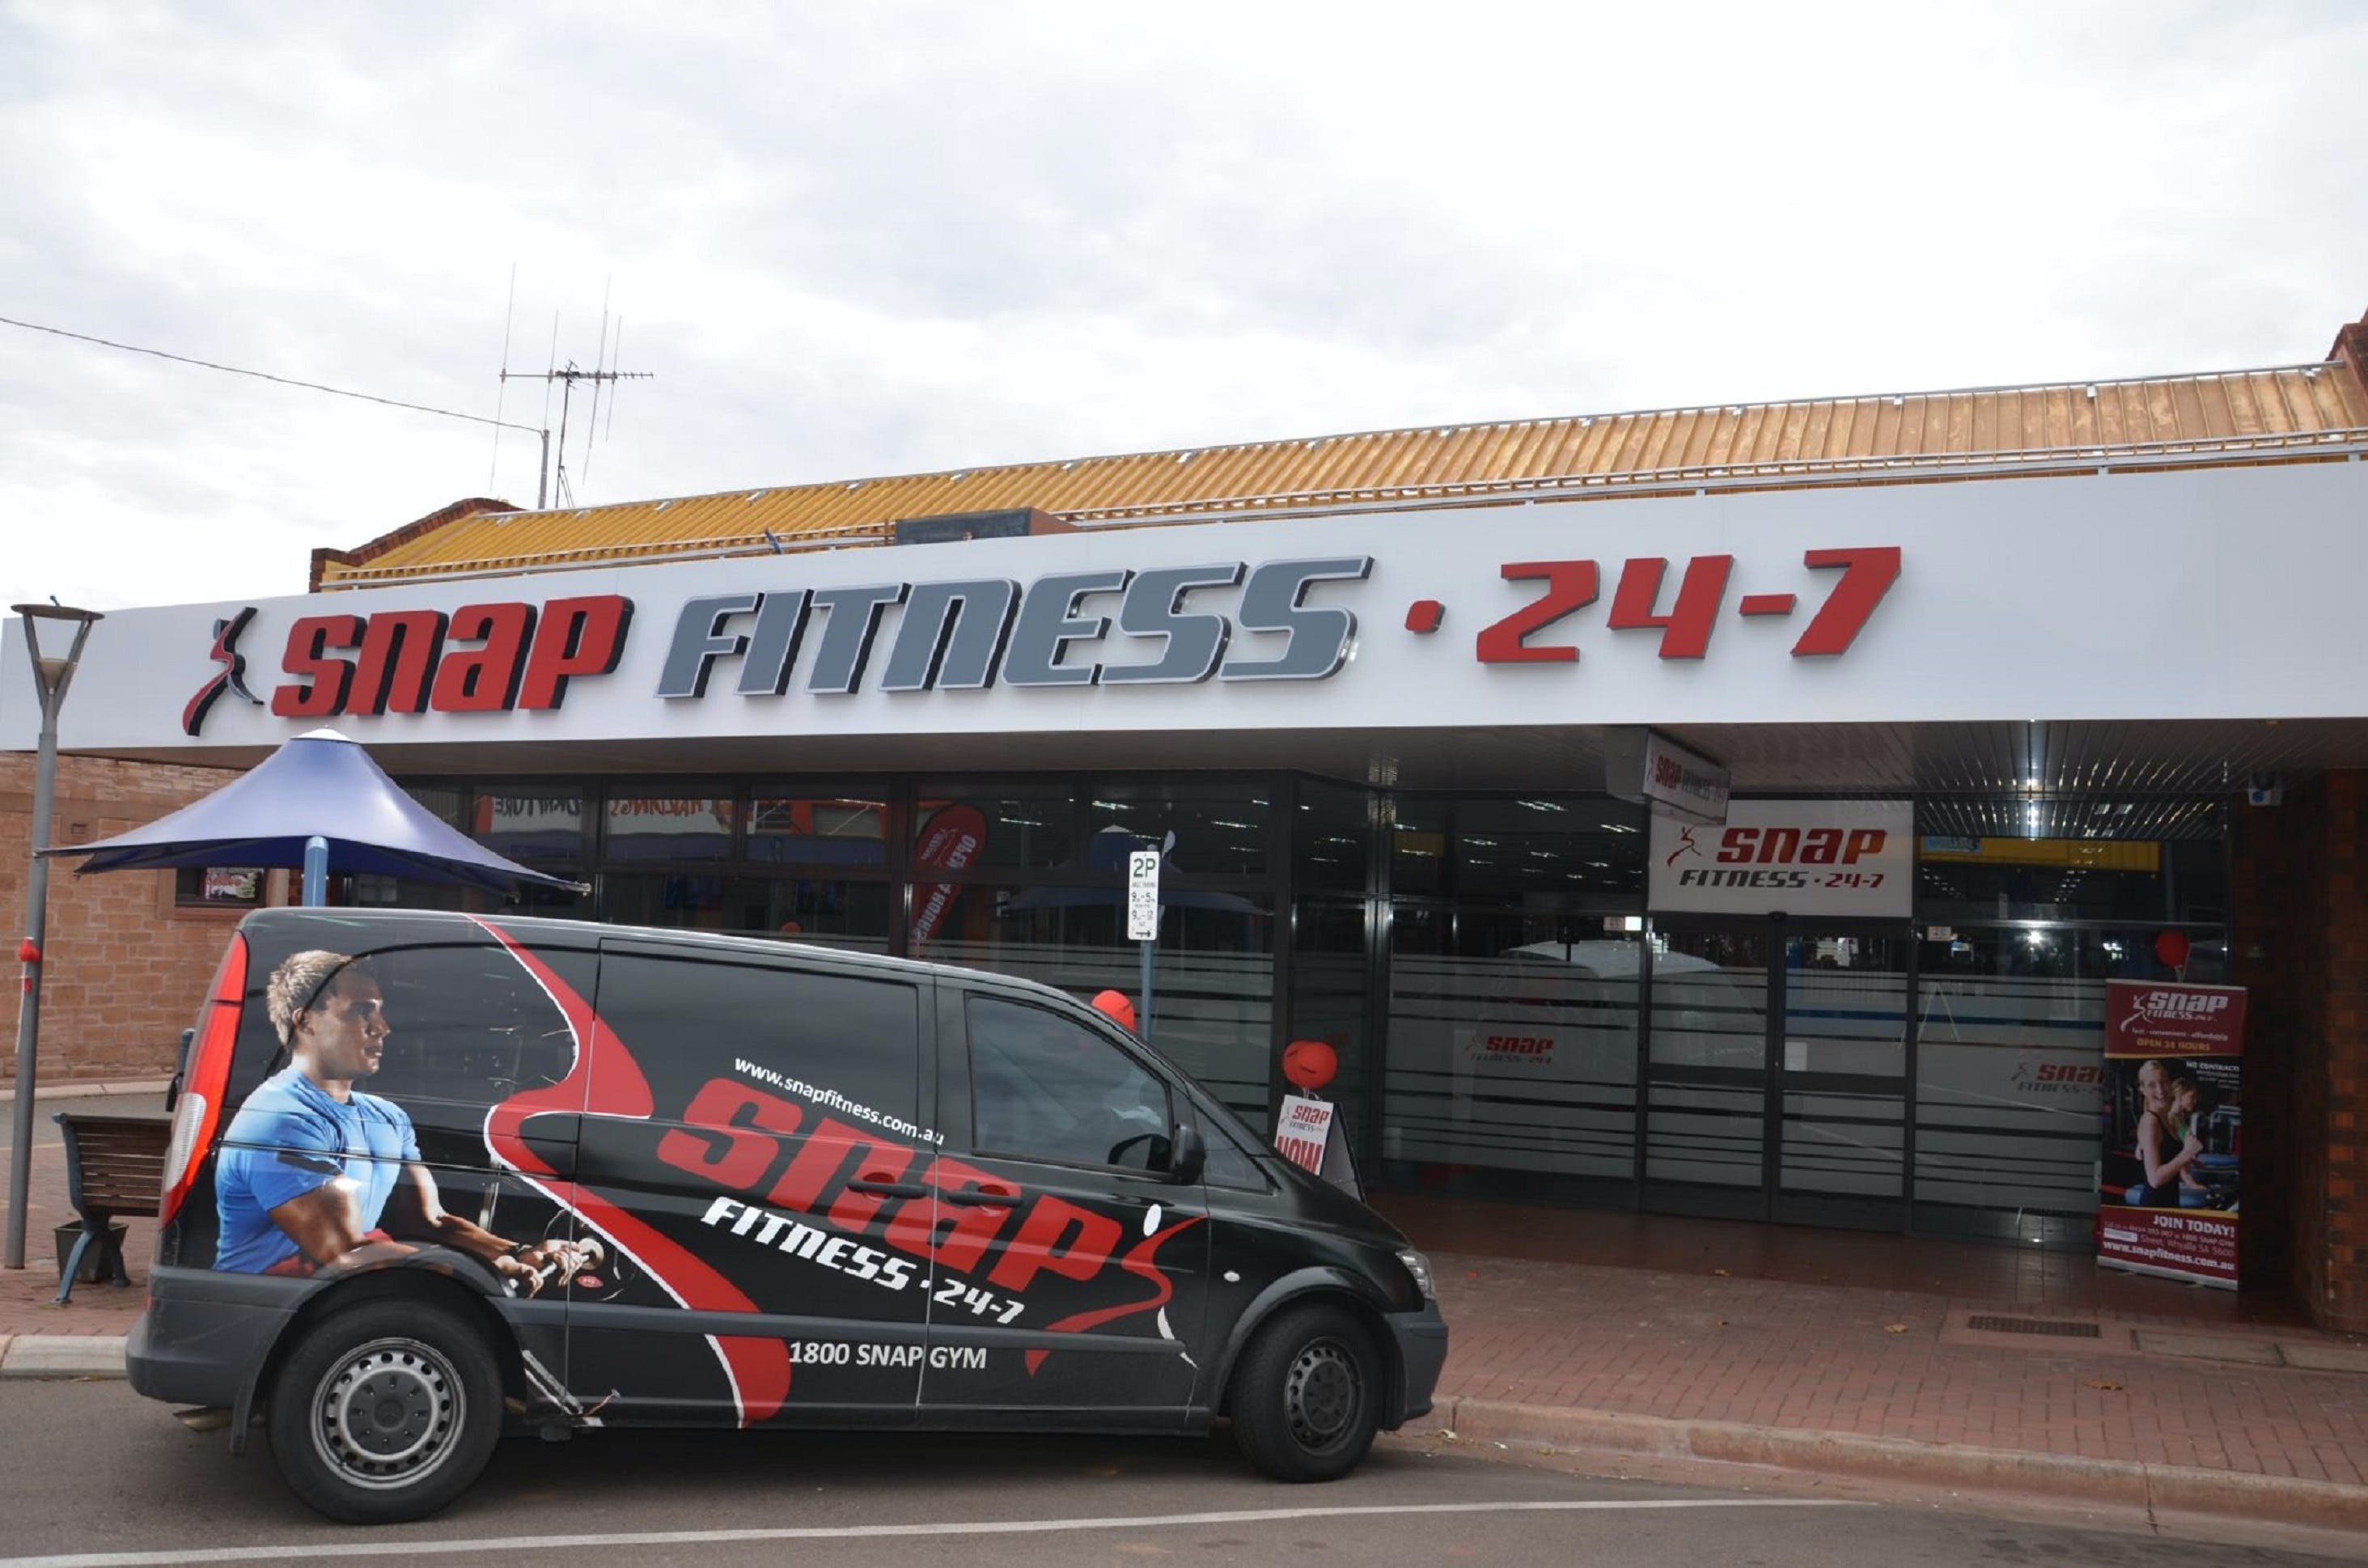 Snap Fitness Whyalla 24/7 gym - Surfers Gold Coast